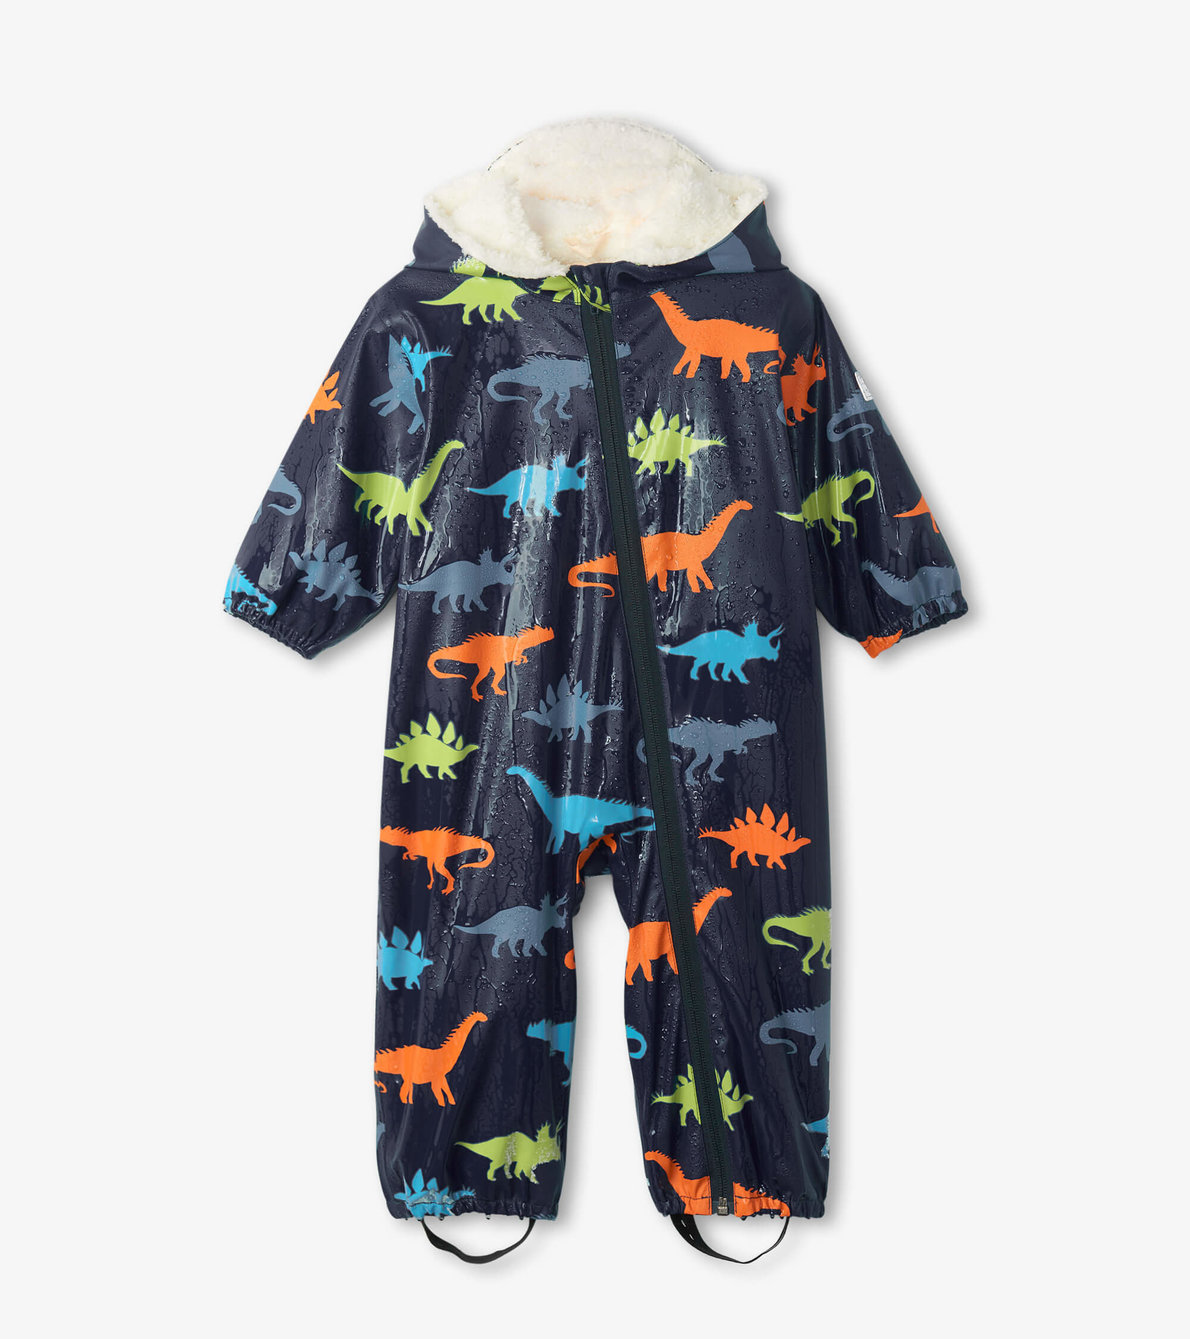 View larger image of Dino Silhouettes Colour Changing Sherpa Lined Baby Rain Bund